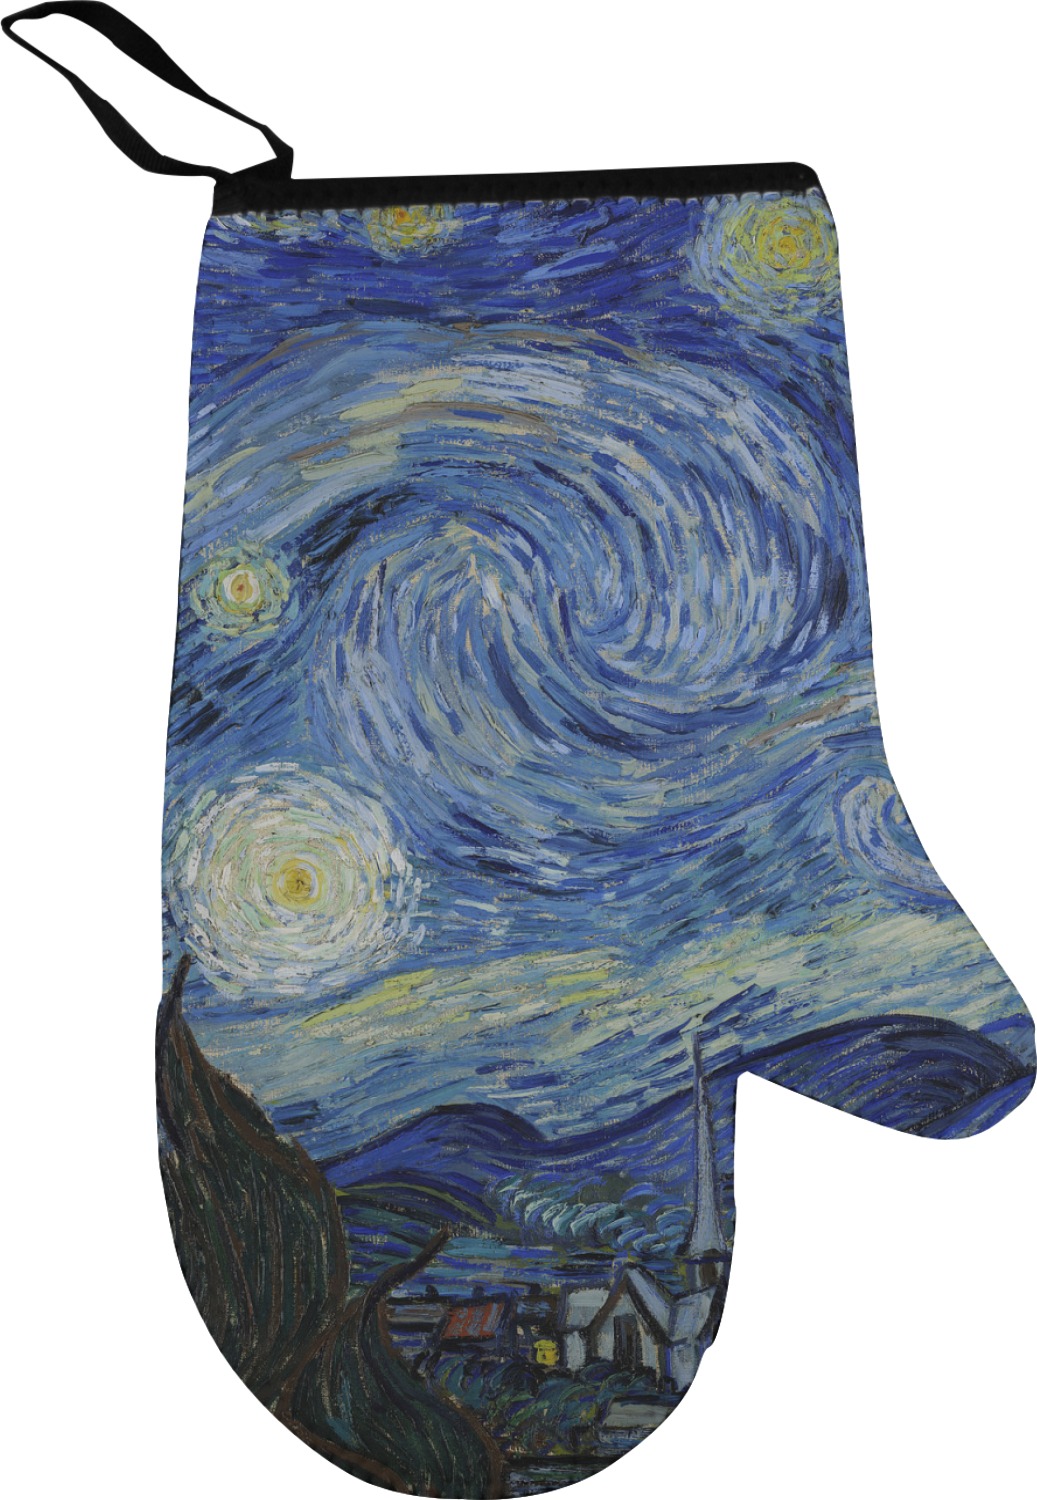 Oven Mitts, Potholders, Pot Handle Cover Gift Sets. Starry Nights